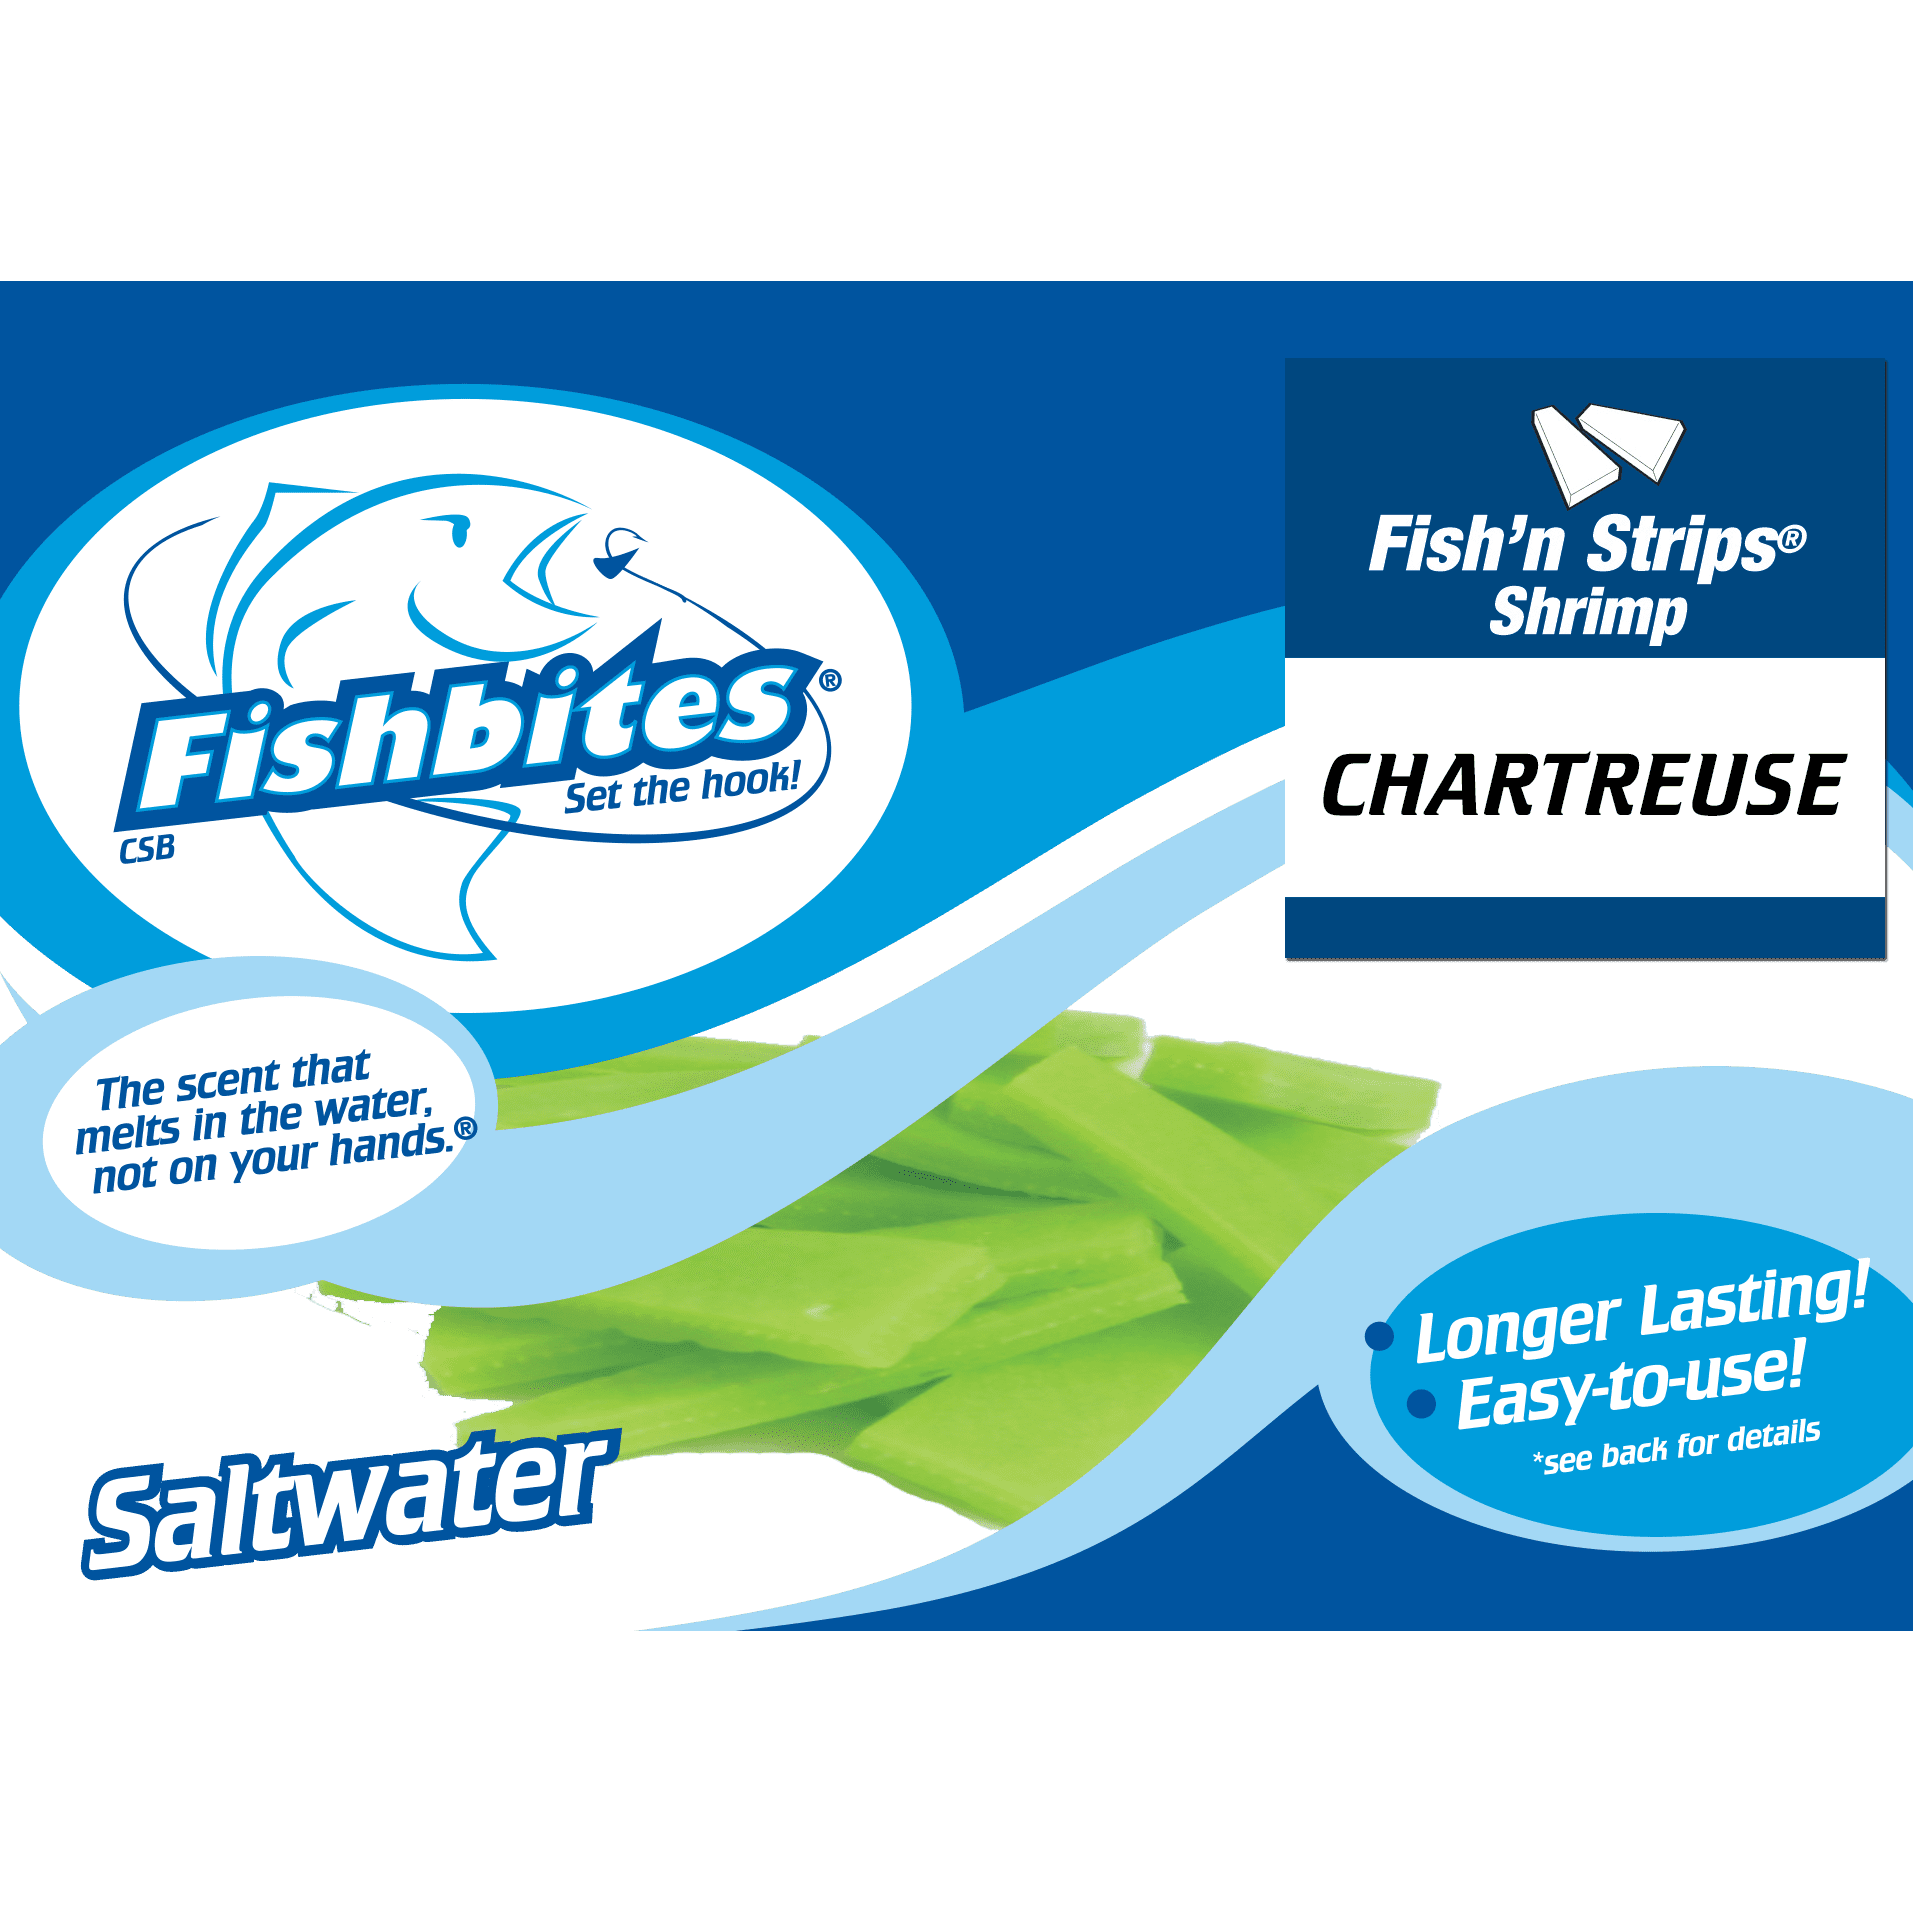 All Saltwater Fishing Baits, Lures Fishbites for sale